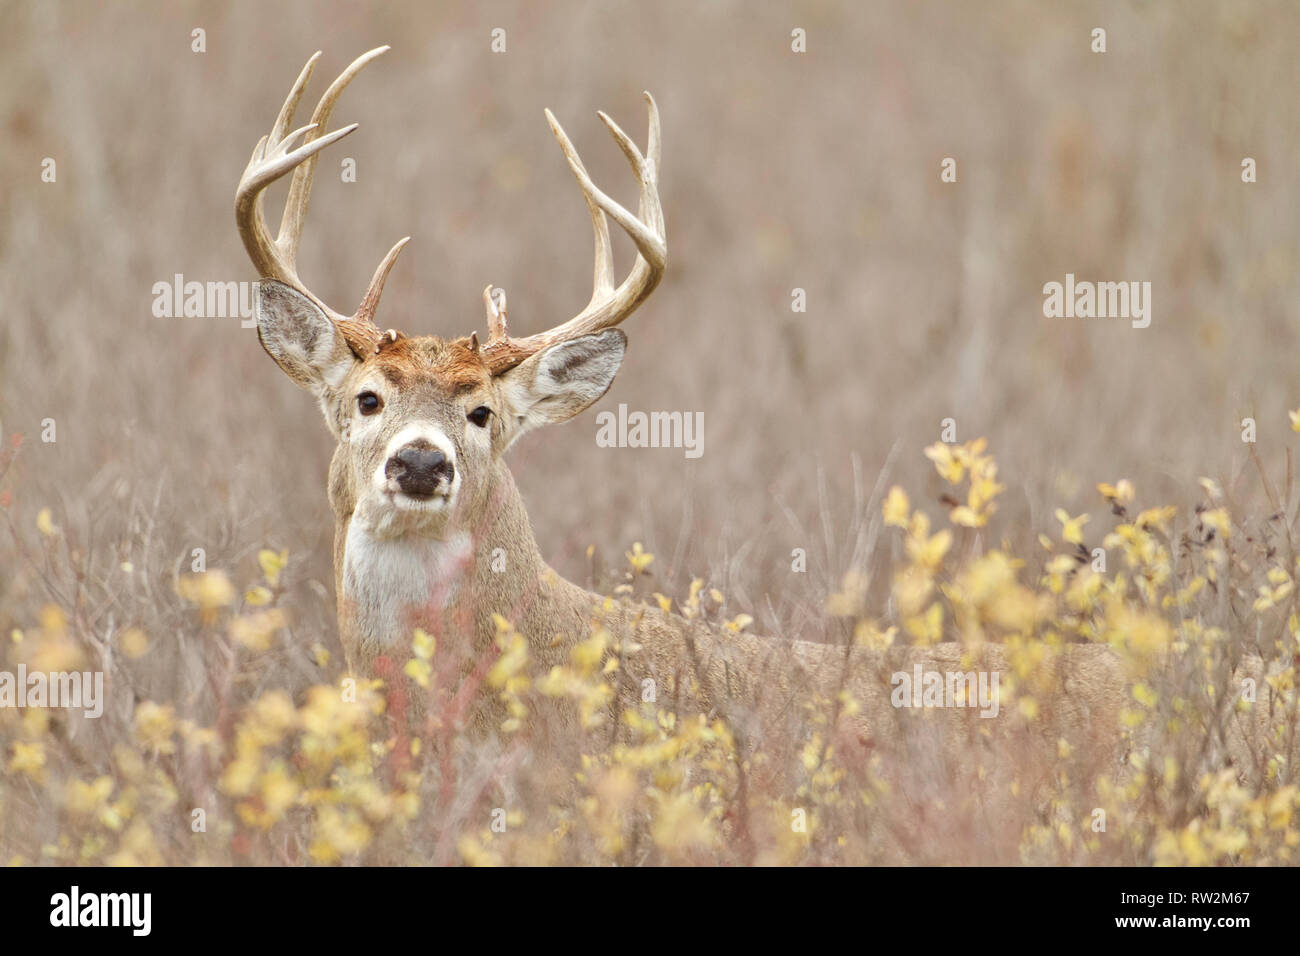 Mature Whitetail Deer buck in fall colors during the autumn breeding season Stock Photo